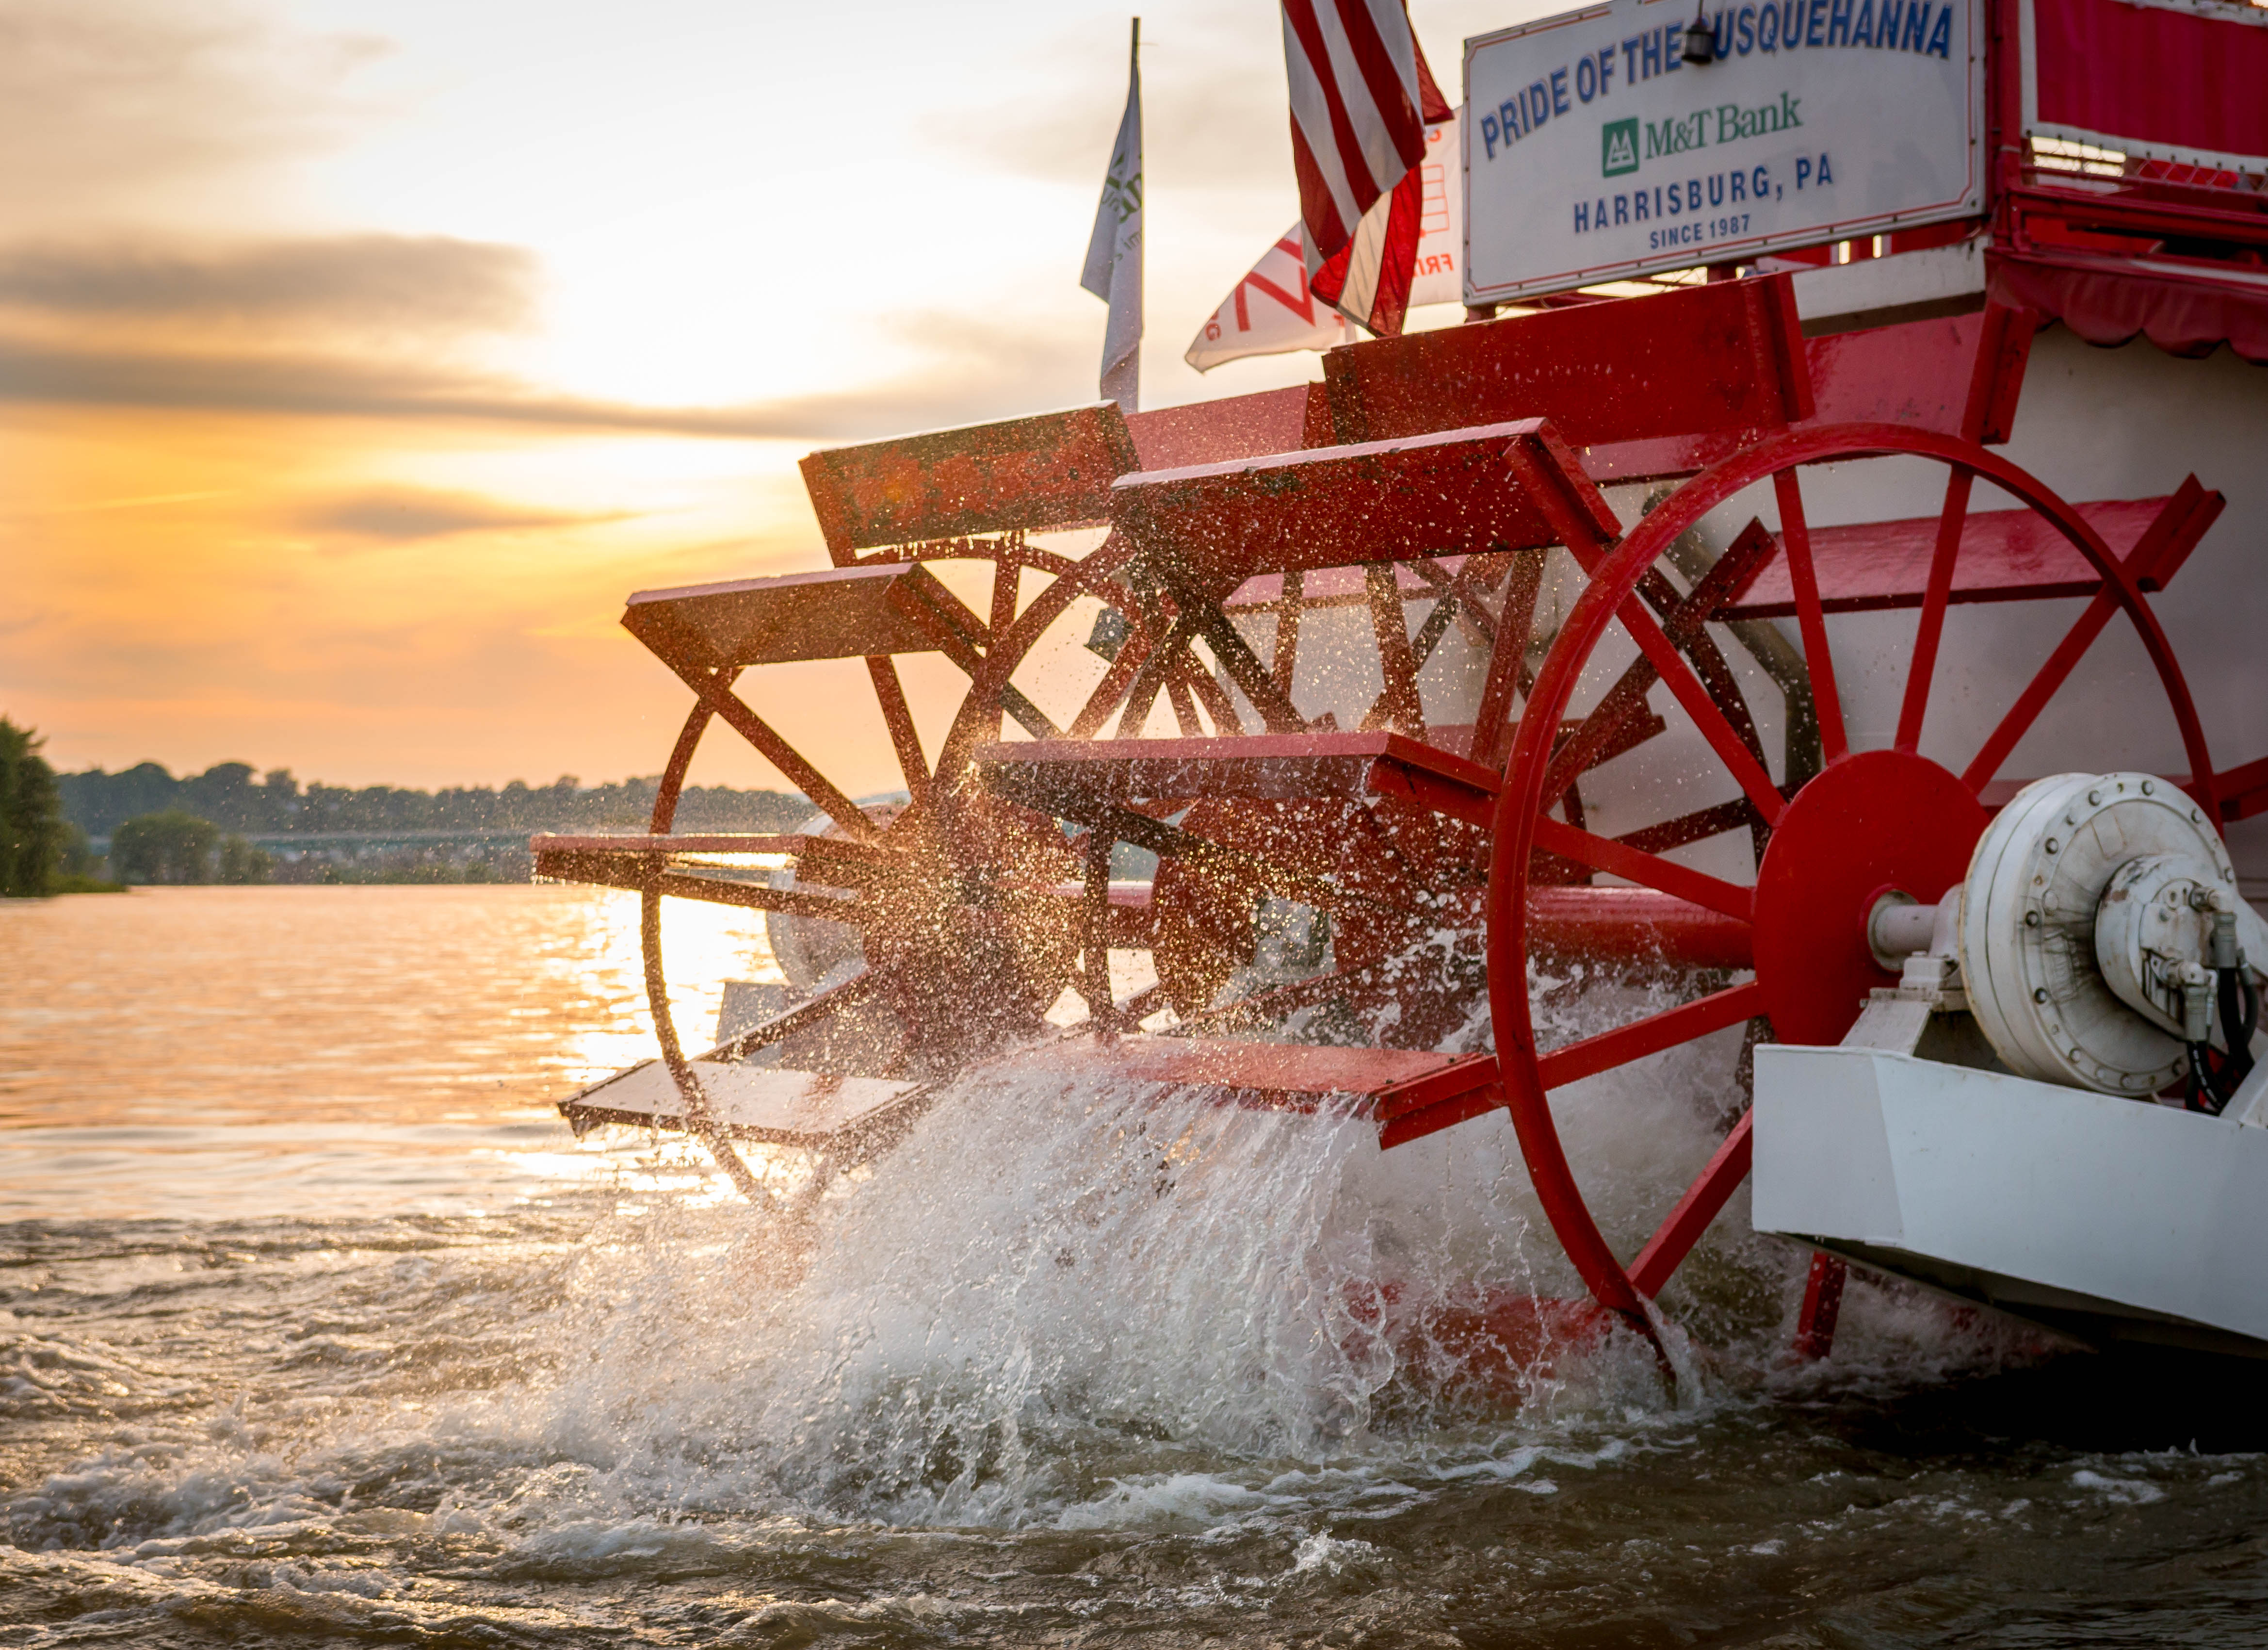 The paddlewheel on the Pride of the Susquehanna